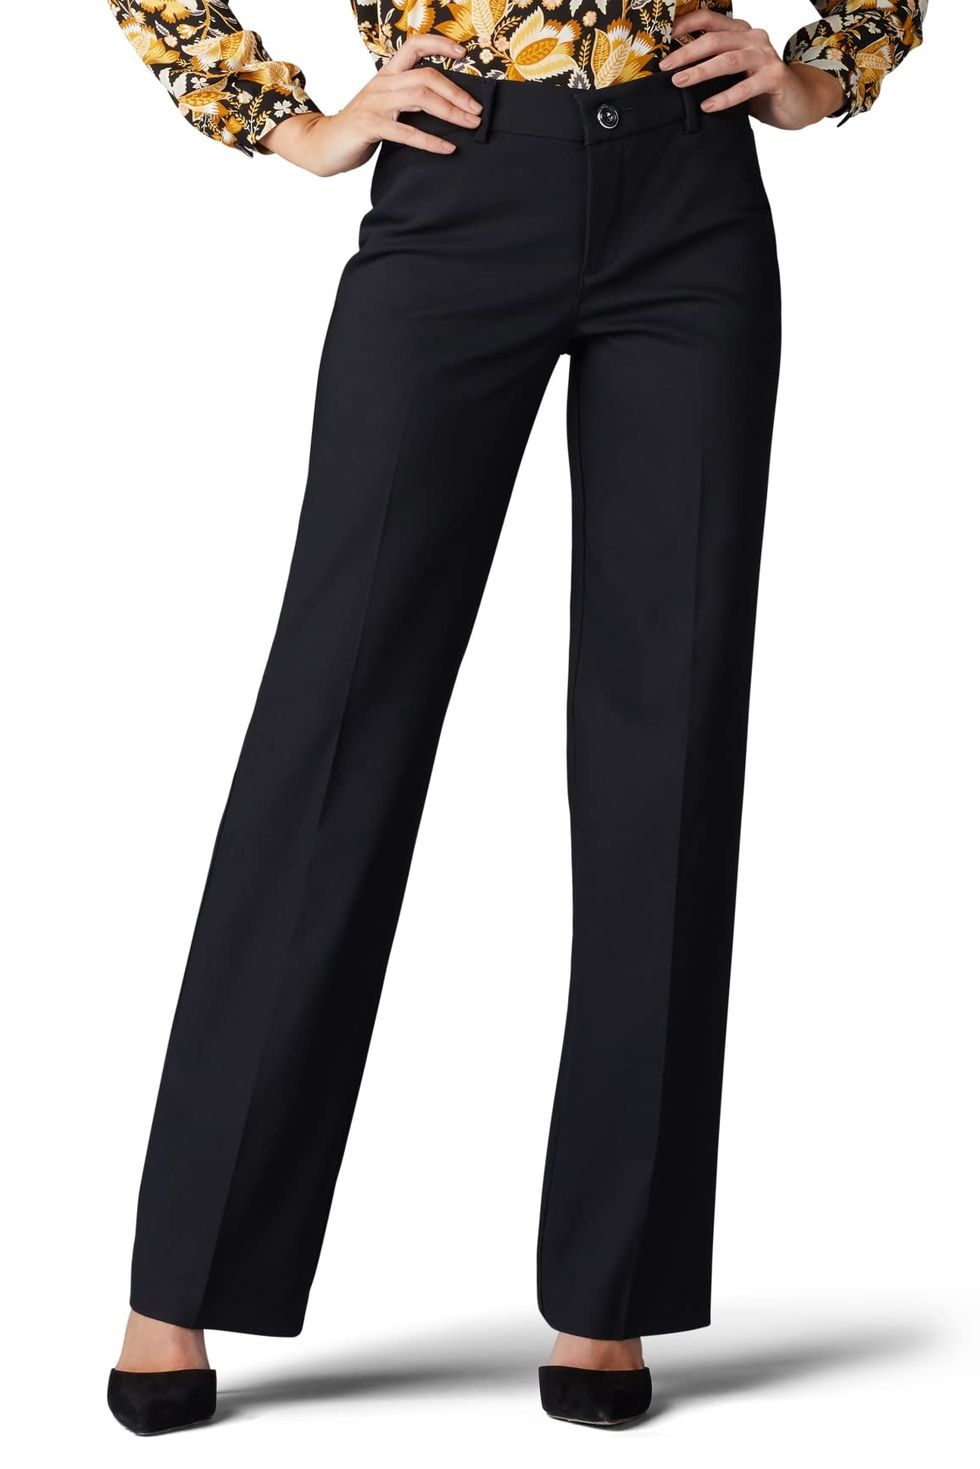 Buy Women Trousers Online  Trouser Pants for Ladies – Styched Fashion